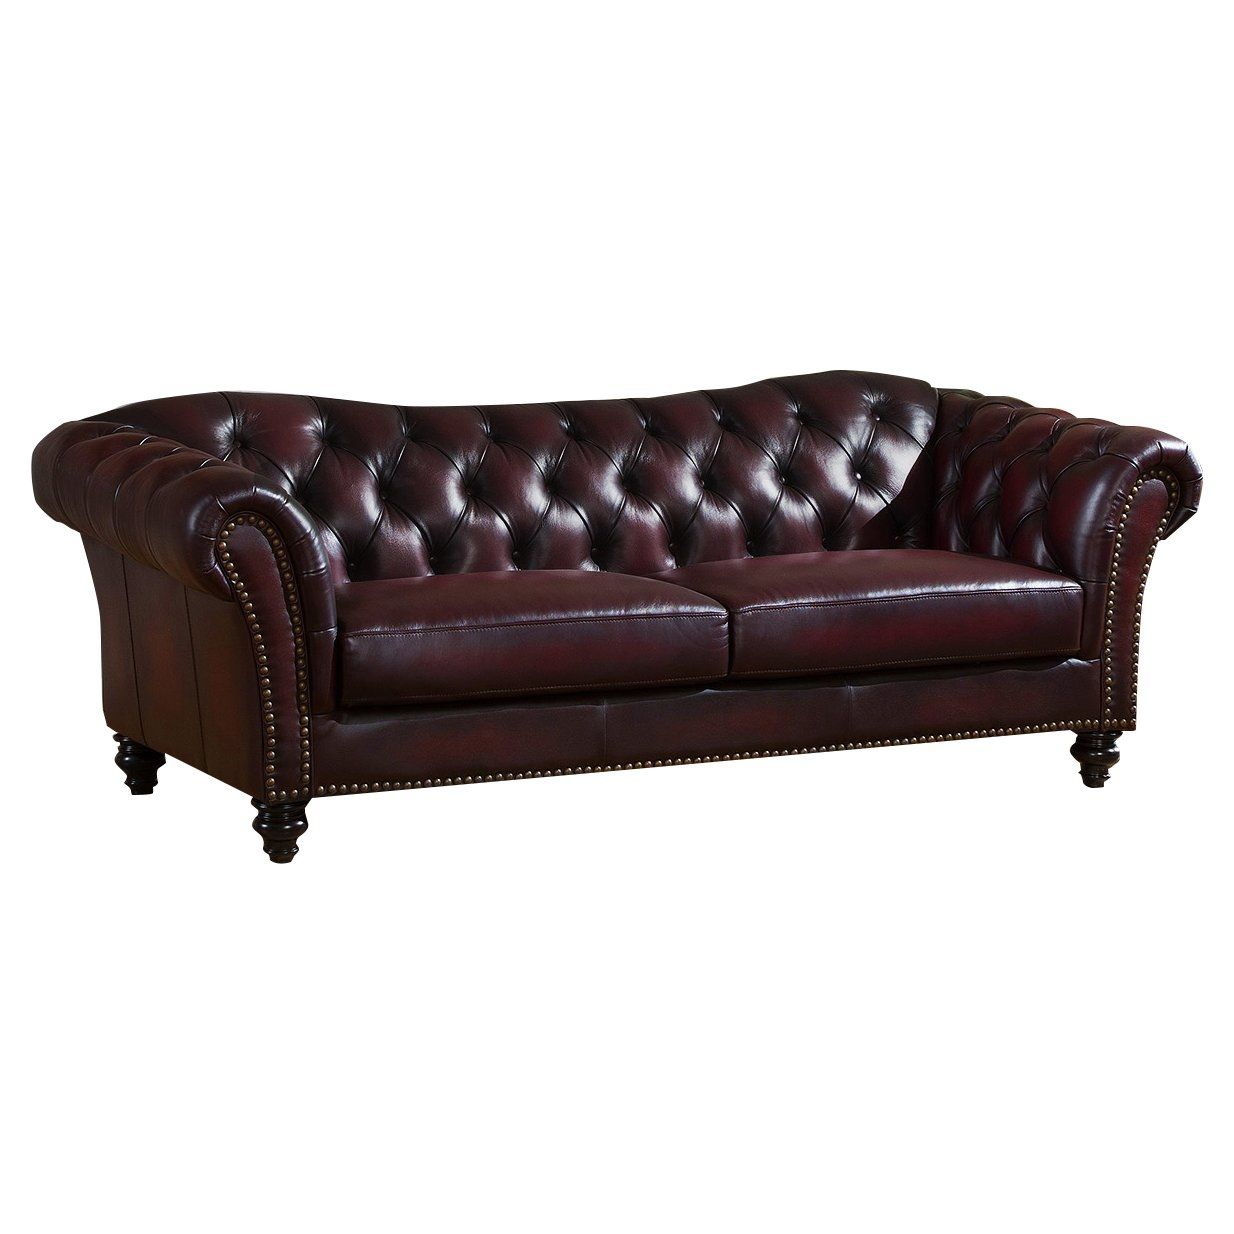 Storage Canterbury Leather Chesterfield Style 3 Seater Sofa With Regard To Canterbury Leather Sofas (View 5 of 15)